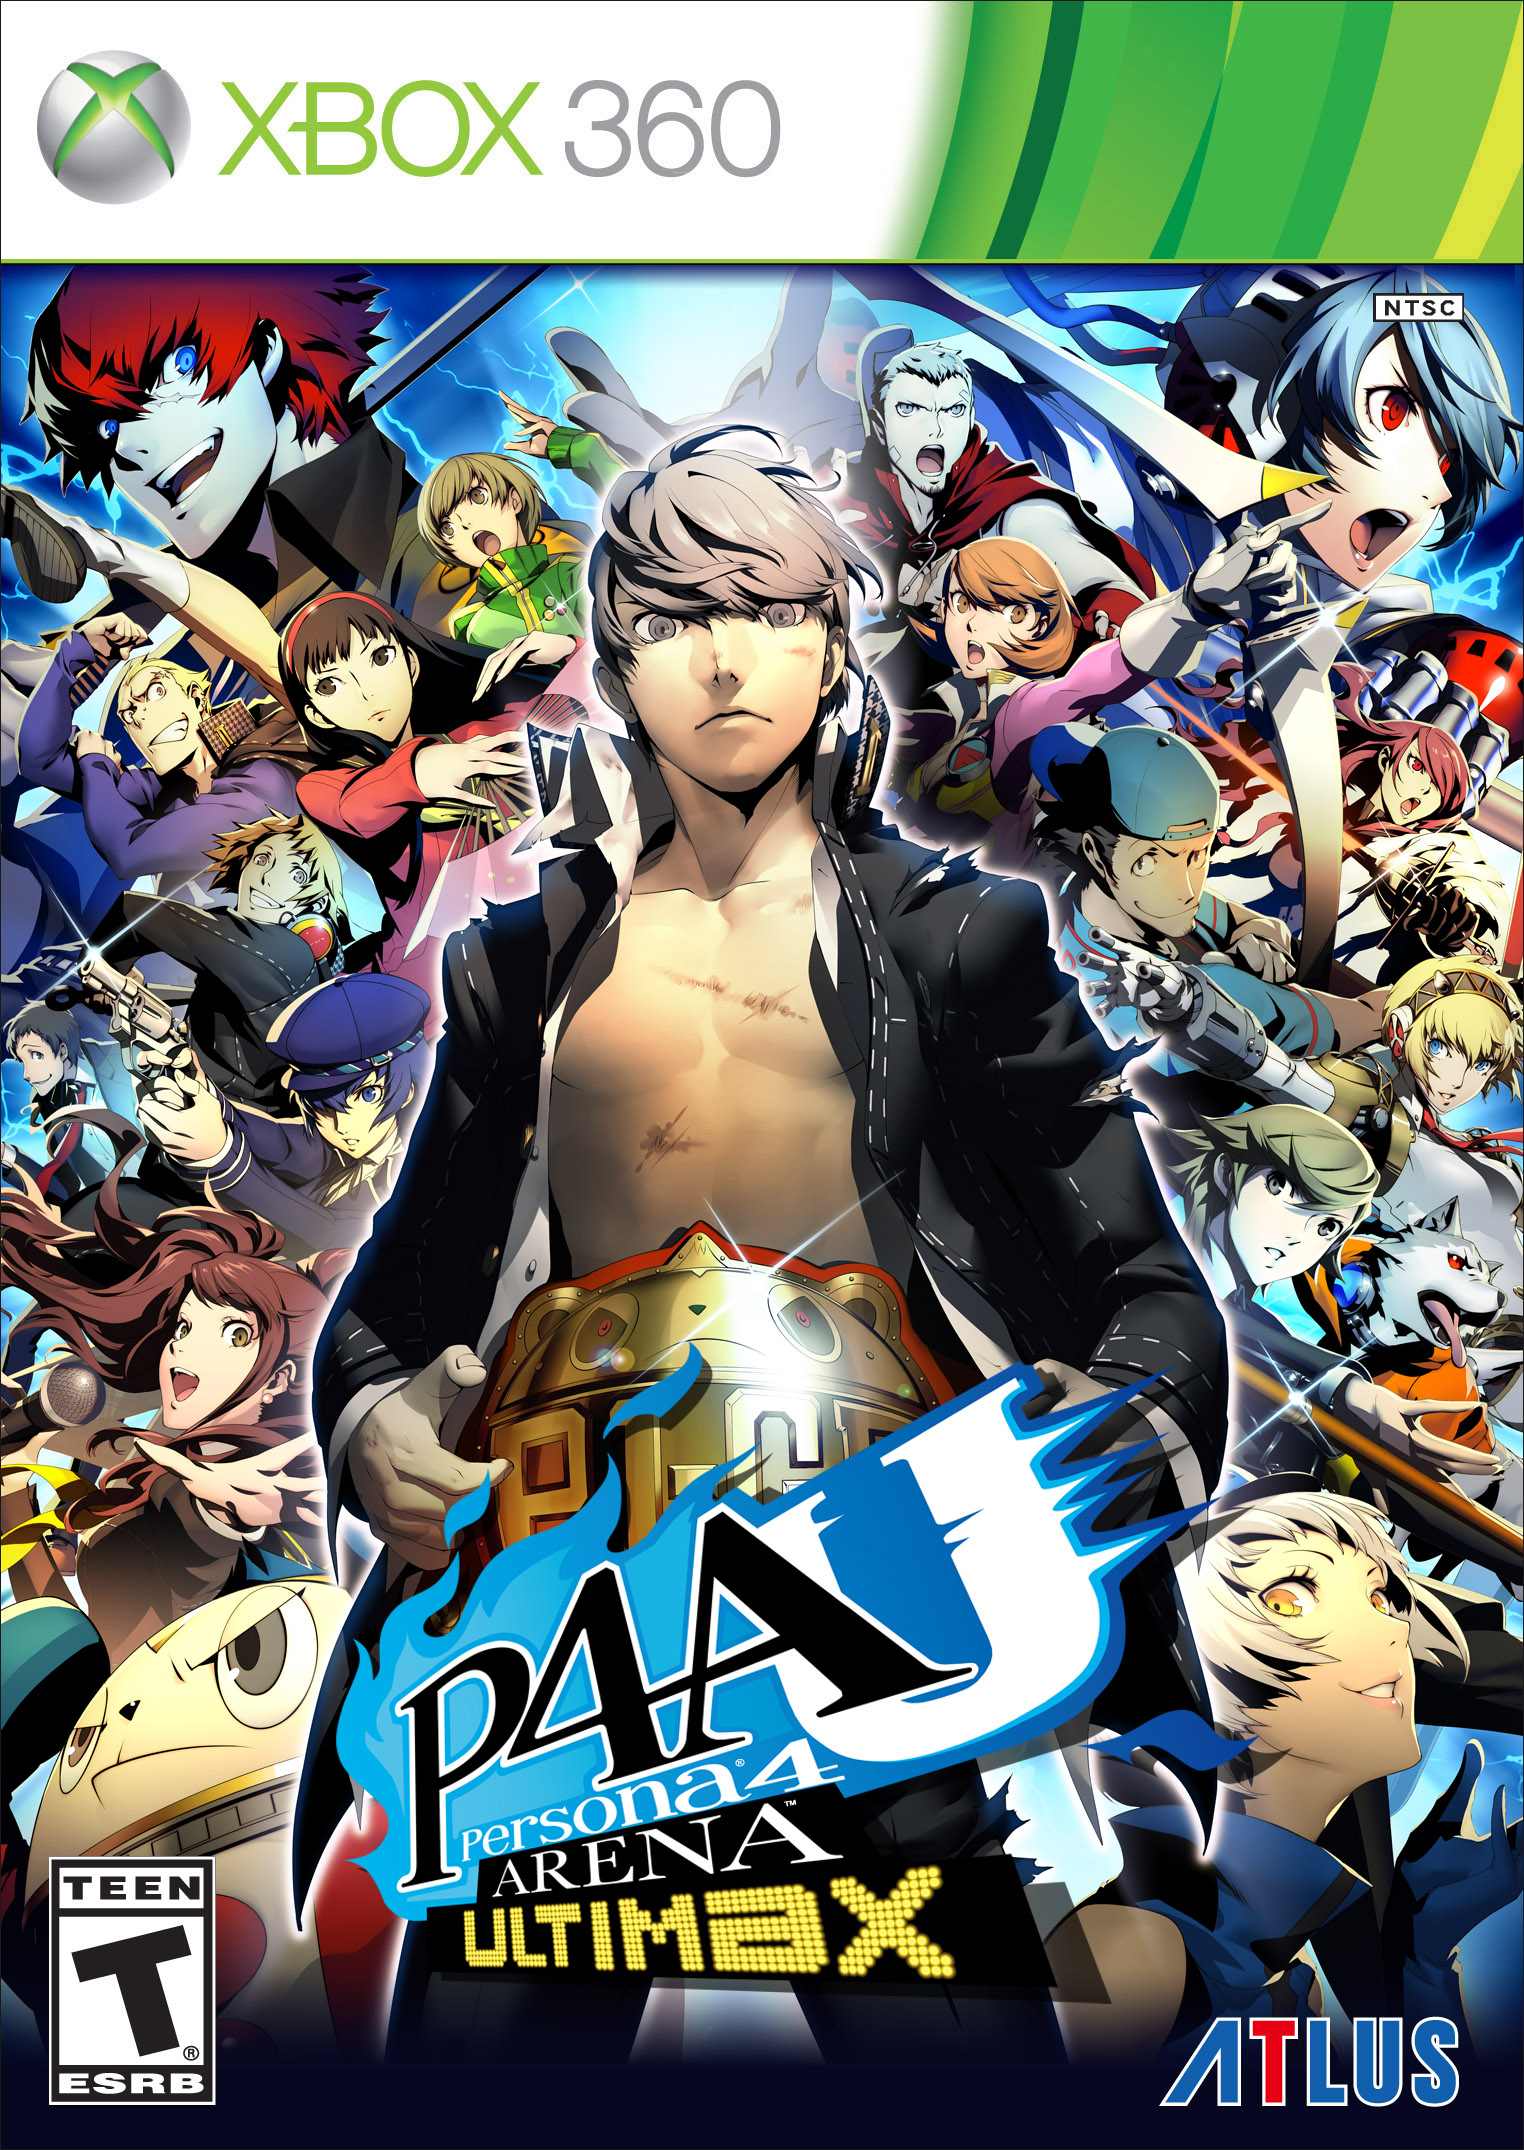 Released Confirmed for Persona 4 Arena Ultimax